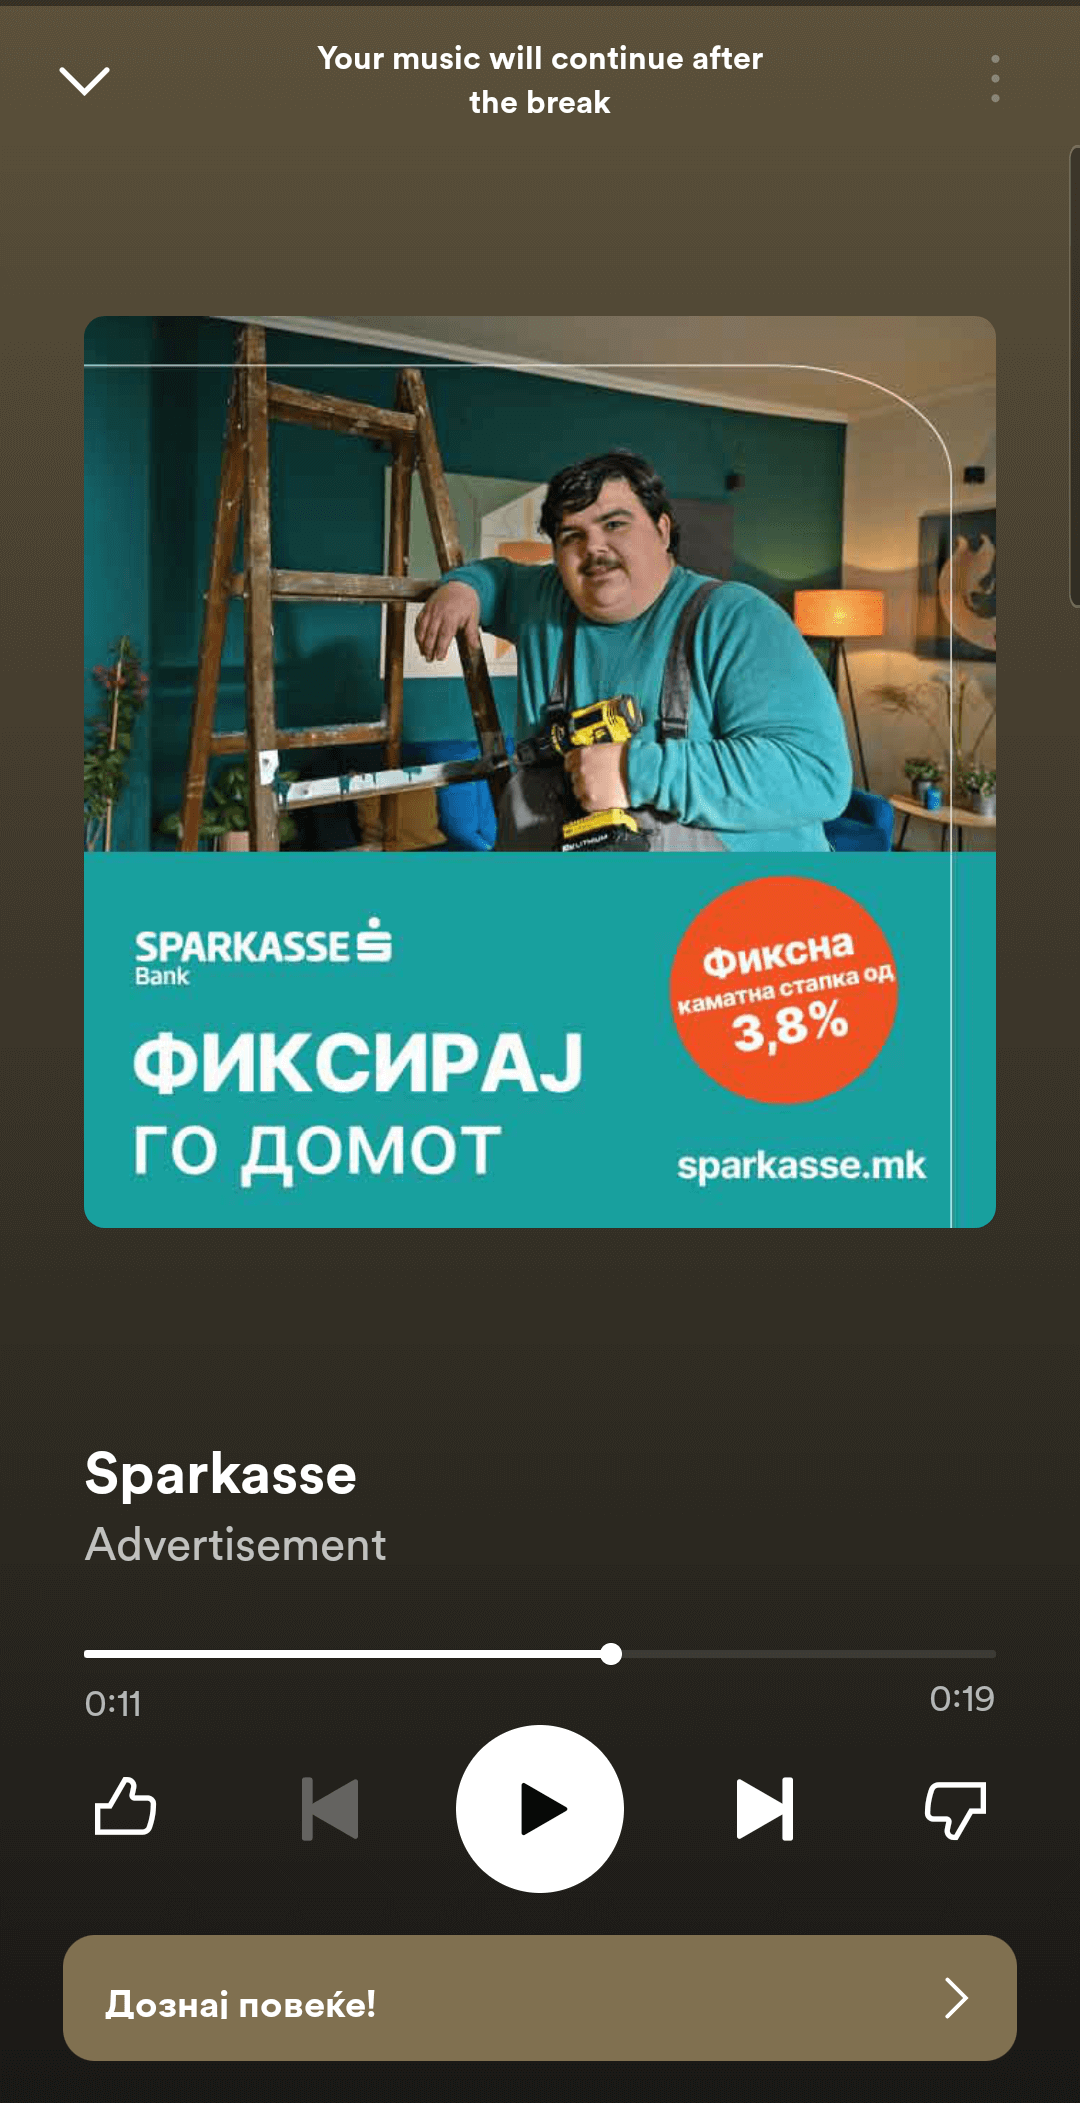 Spotify ad for Sparkasse